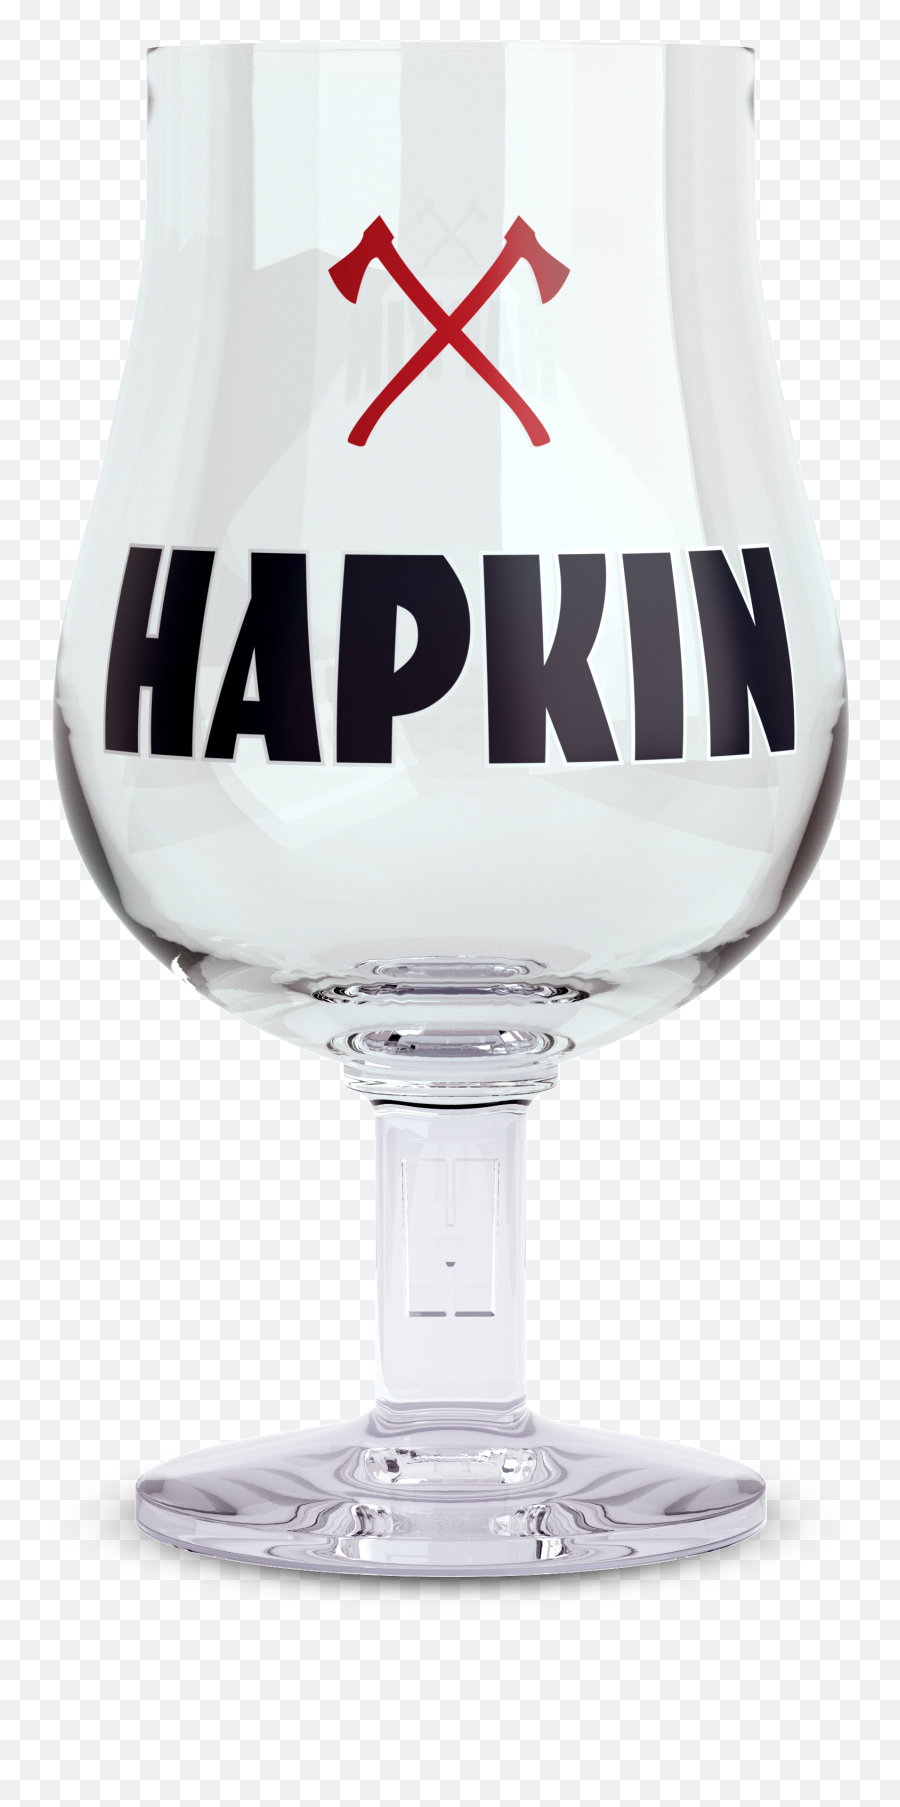 Filehapkin - Glassemptypng Wikimedia Commons Snifter,Champagne Glass Png